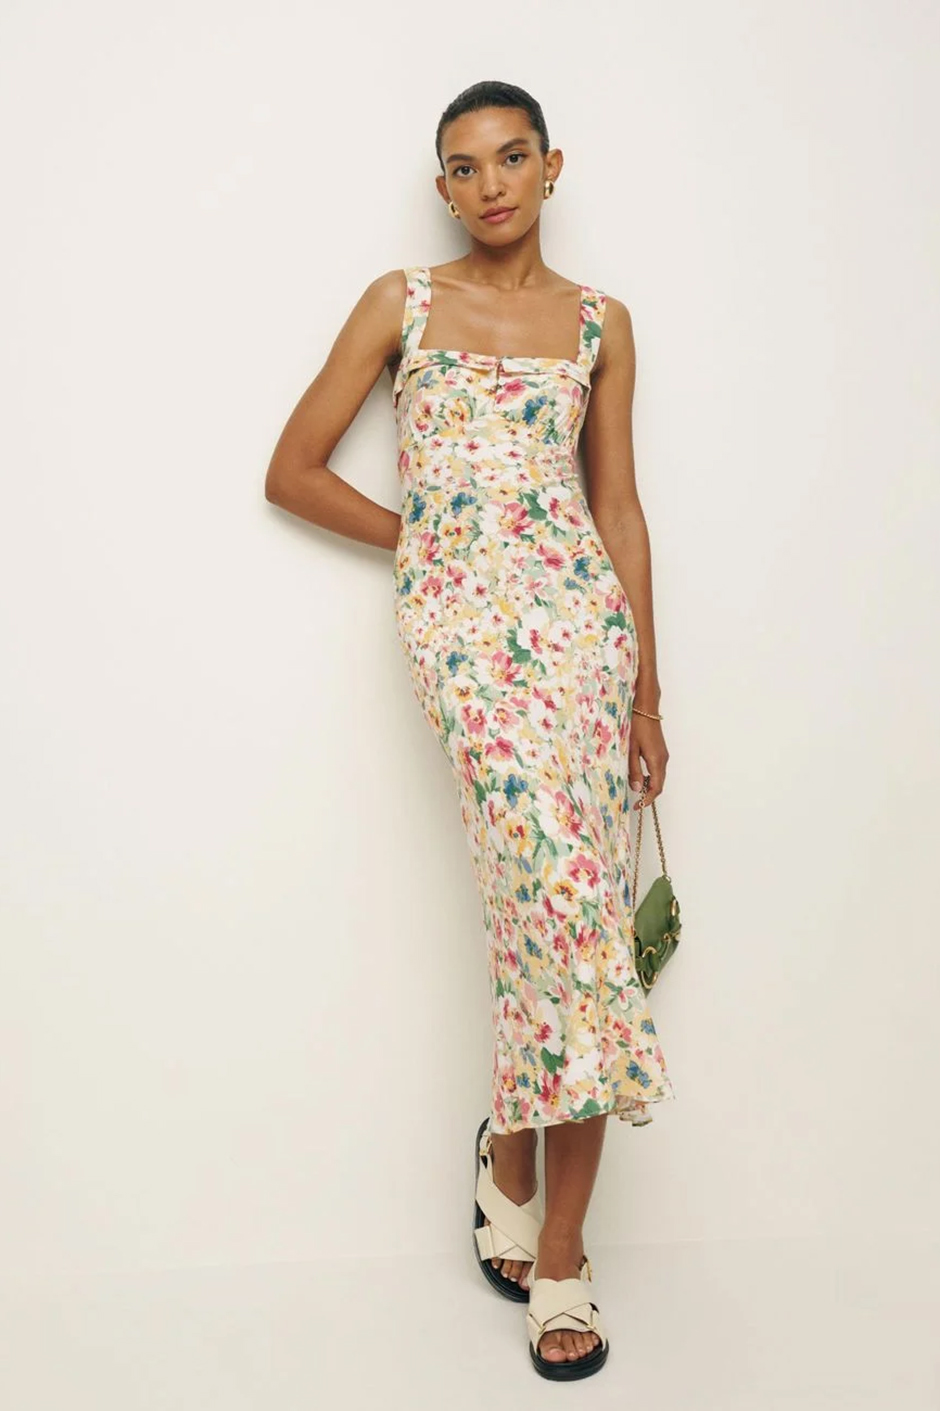 Floral midi dress in crepe fabric from Reformation for summer wedding guest dress idea